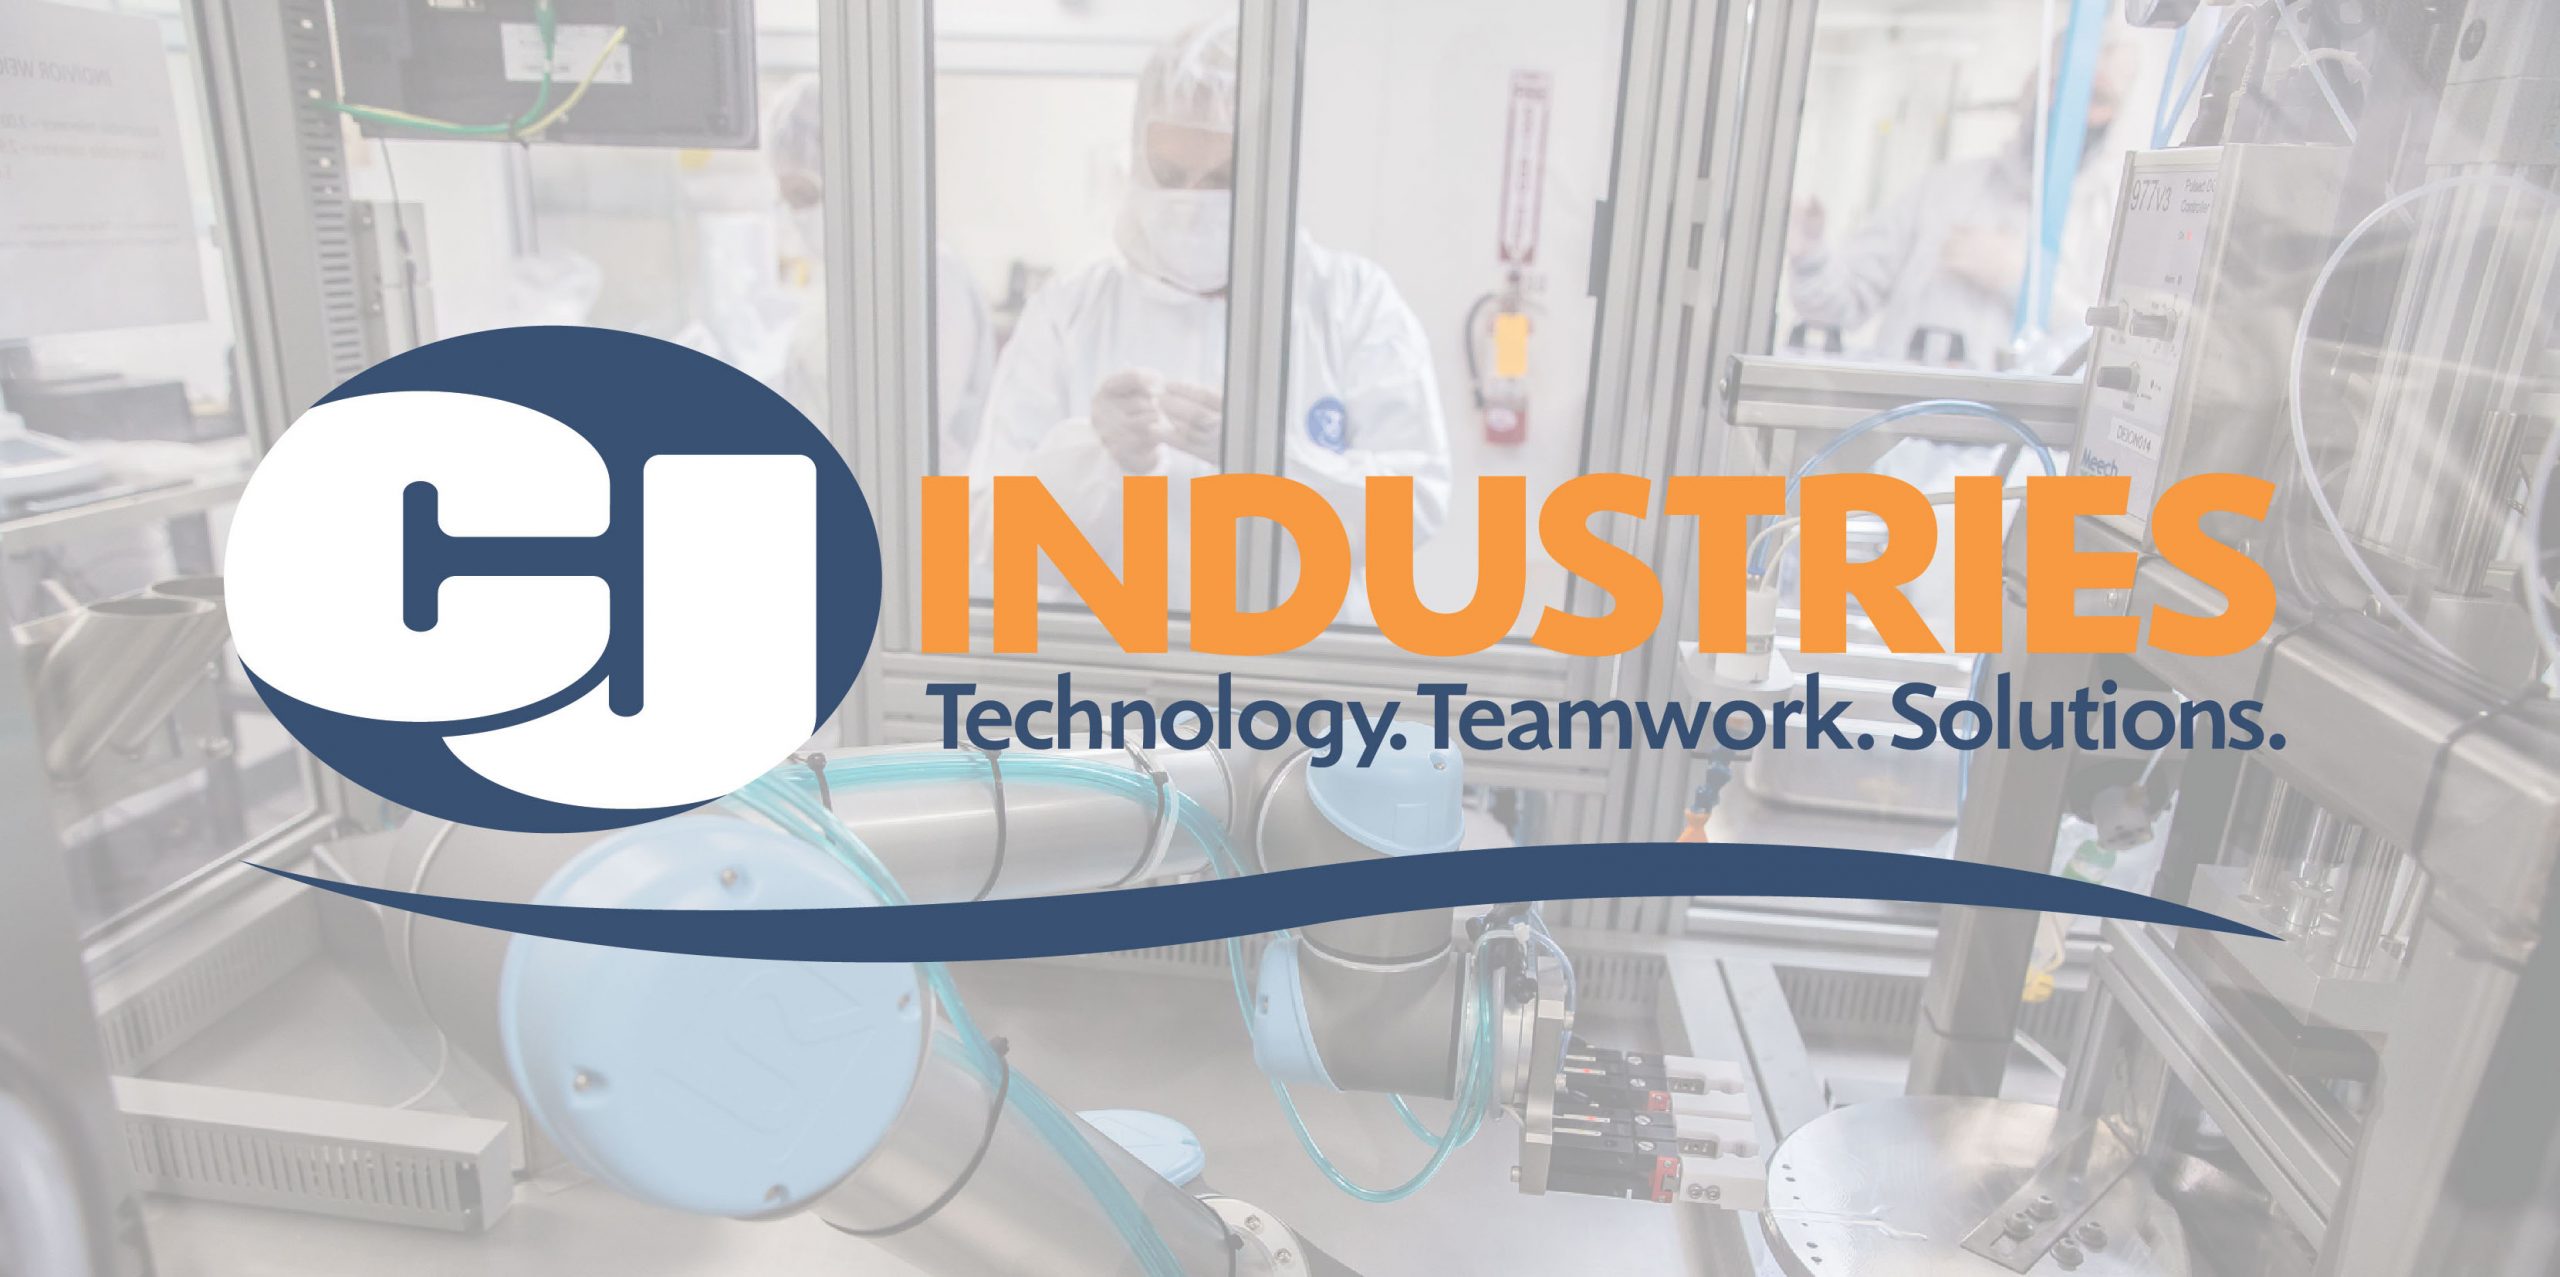 c and j industries, technology teamwork and solutions